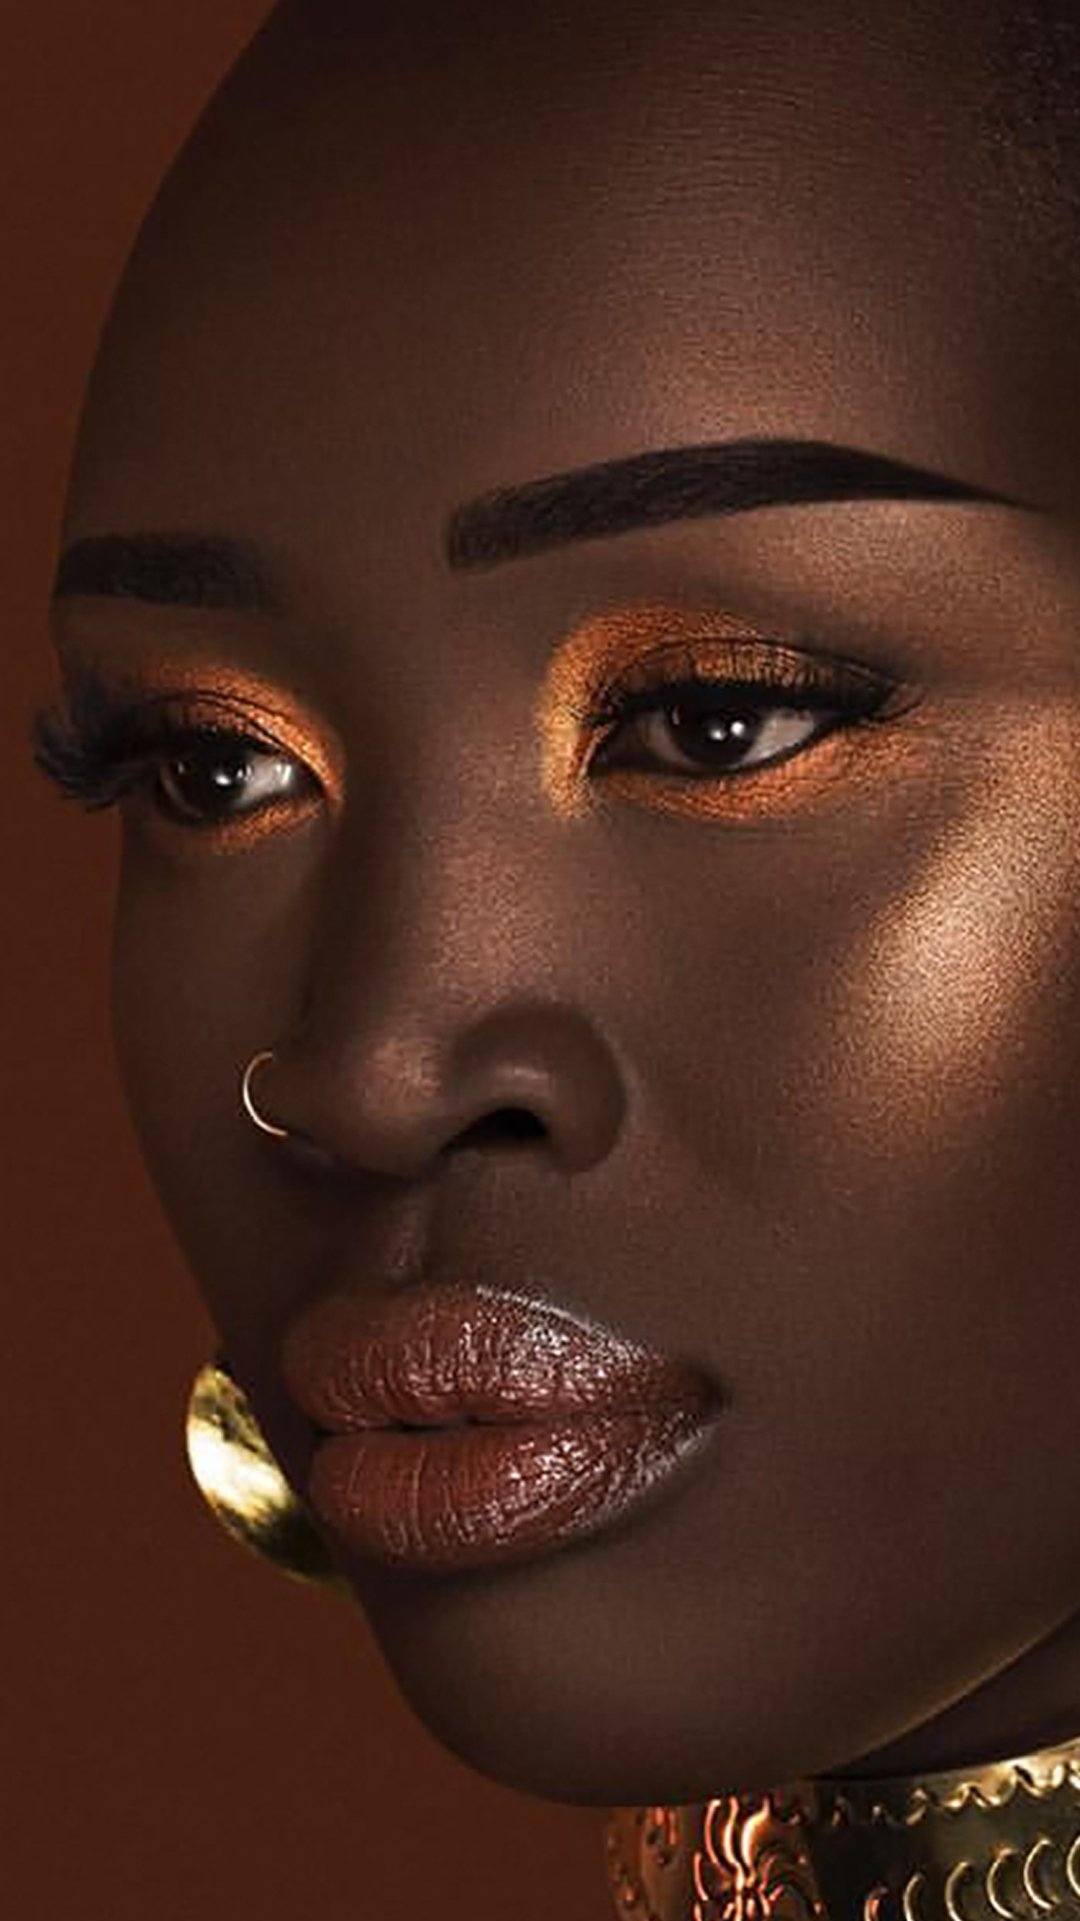 How To Apply Highlighter: The Ultimate Guide To Getting It Right